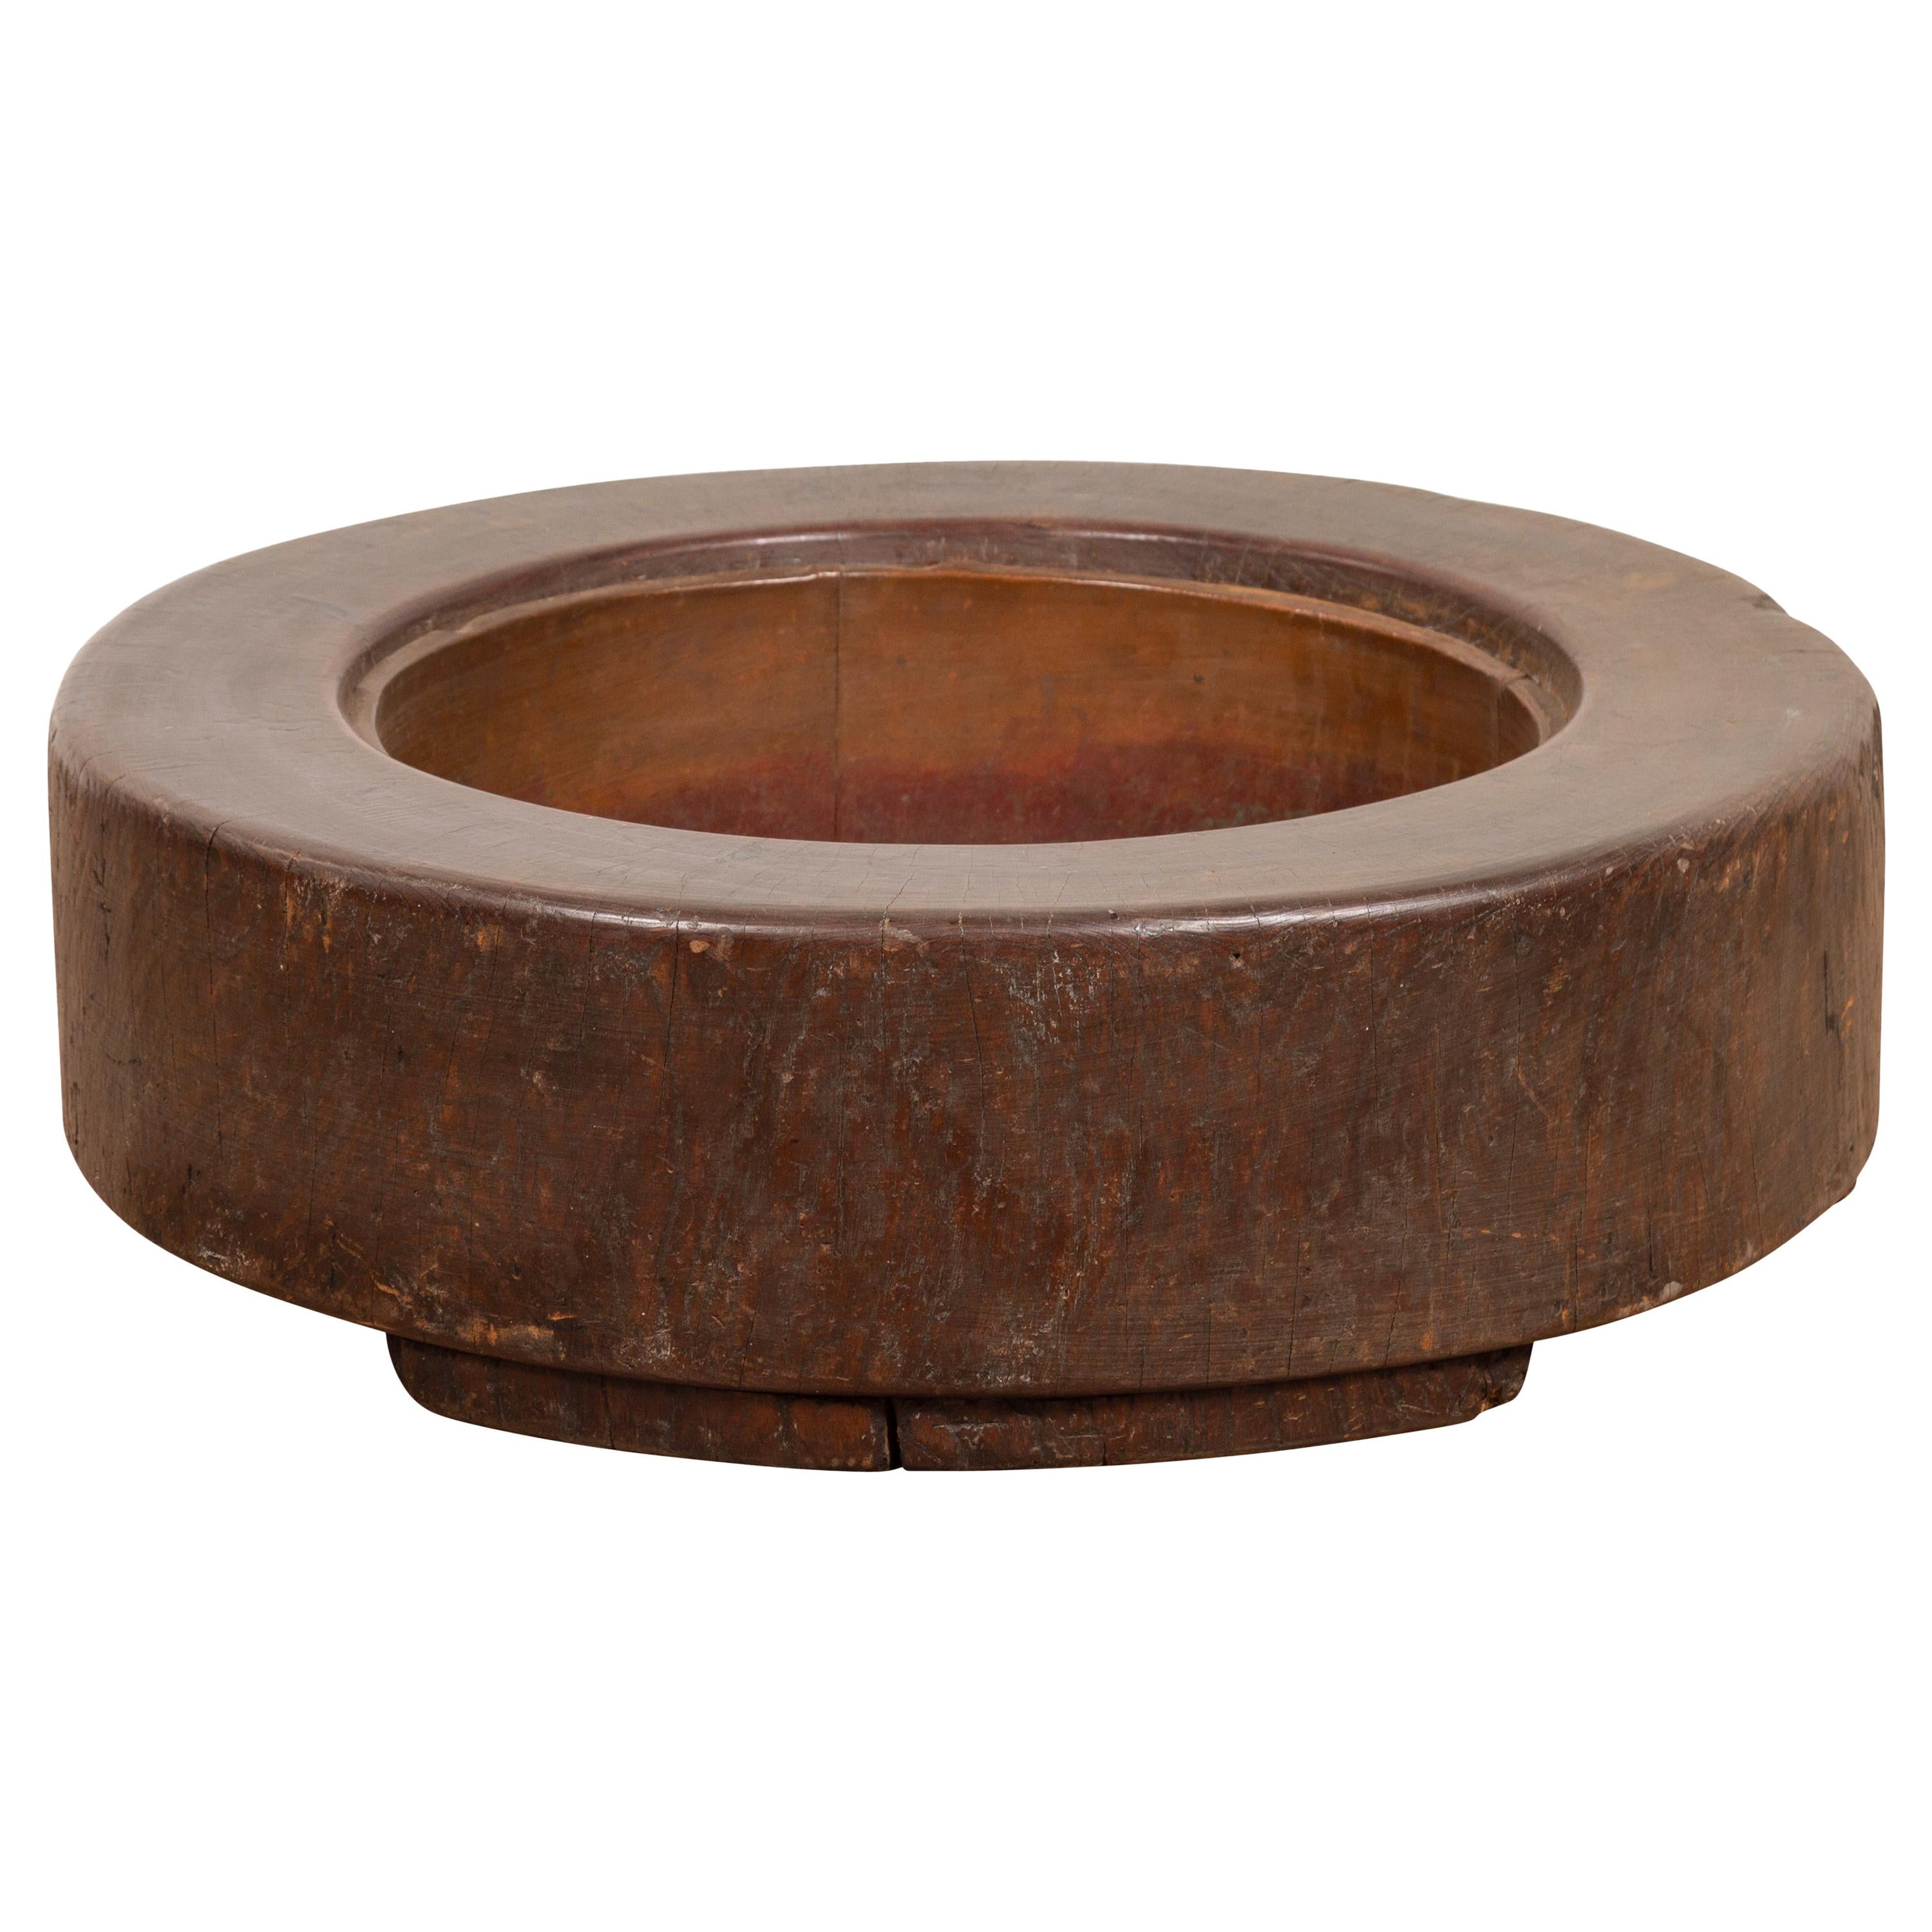 Meiji Period Japanese Wood Root Round Hibachi with Brown Patina, circa 1900 For Sale